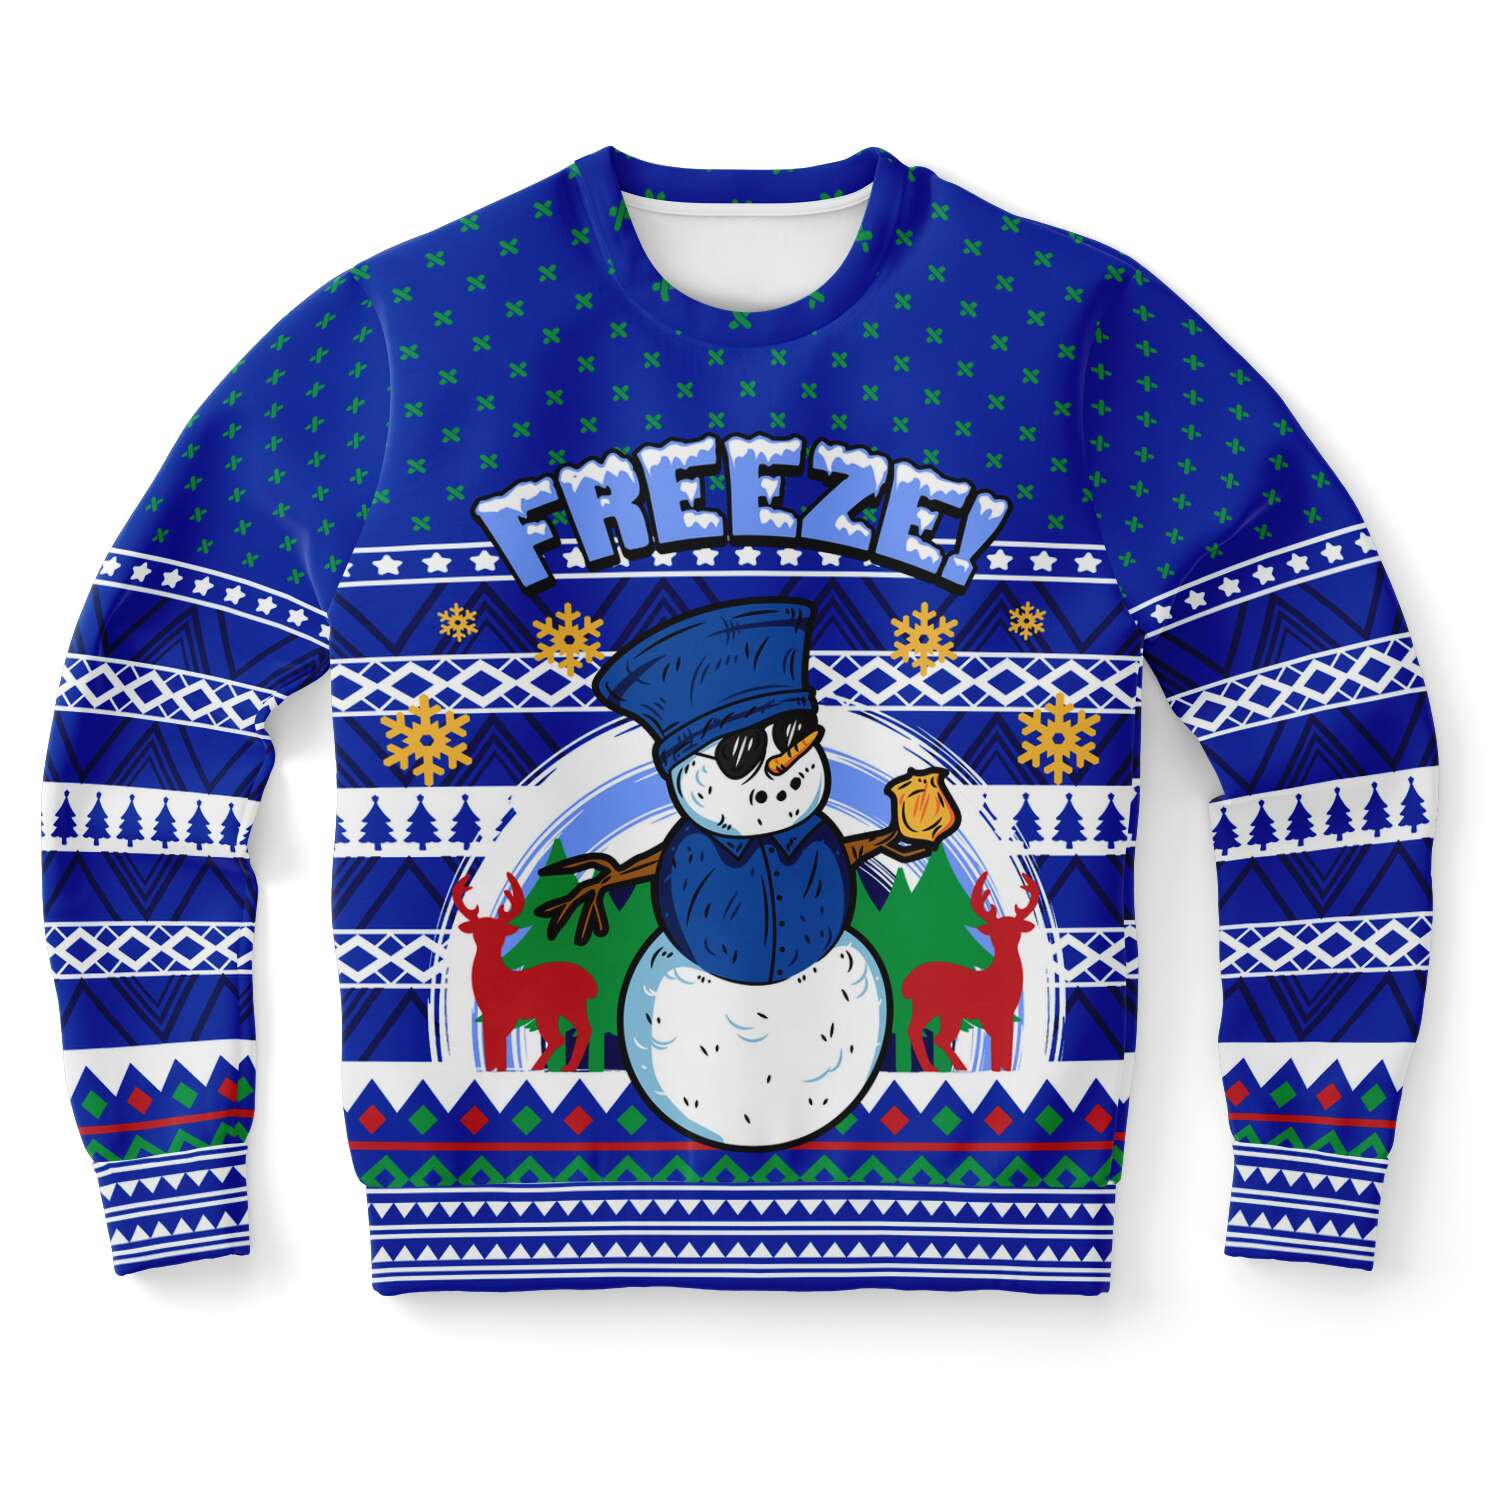 Snowman Ugly Christmas Sweater, Blue Police Freeze Snow Funny Tacky Winter Print Party Sweatshirt Holiday Men Women Christmas Gift Plus Size Starcove Fashion